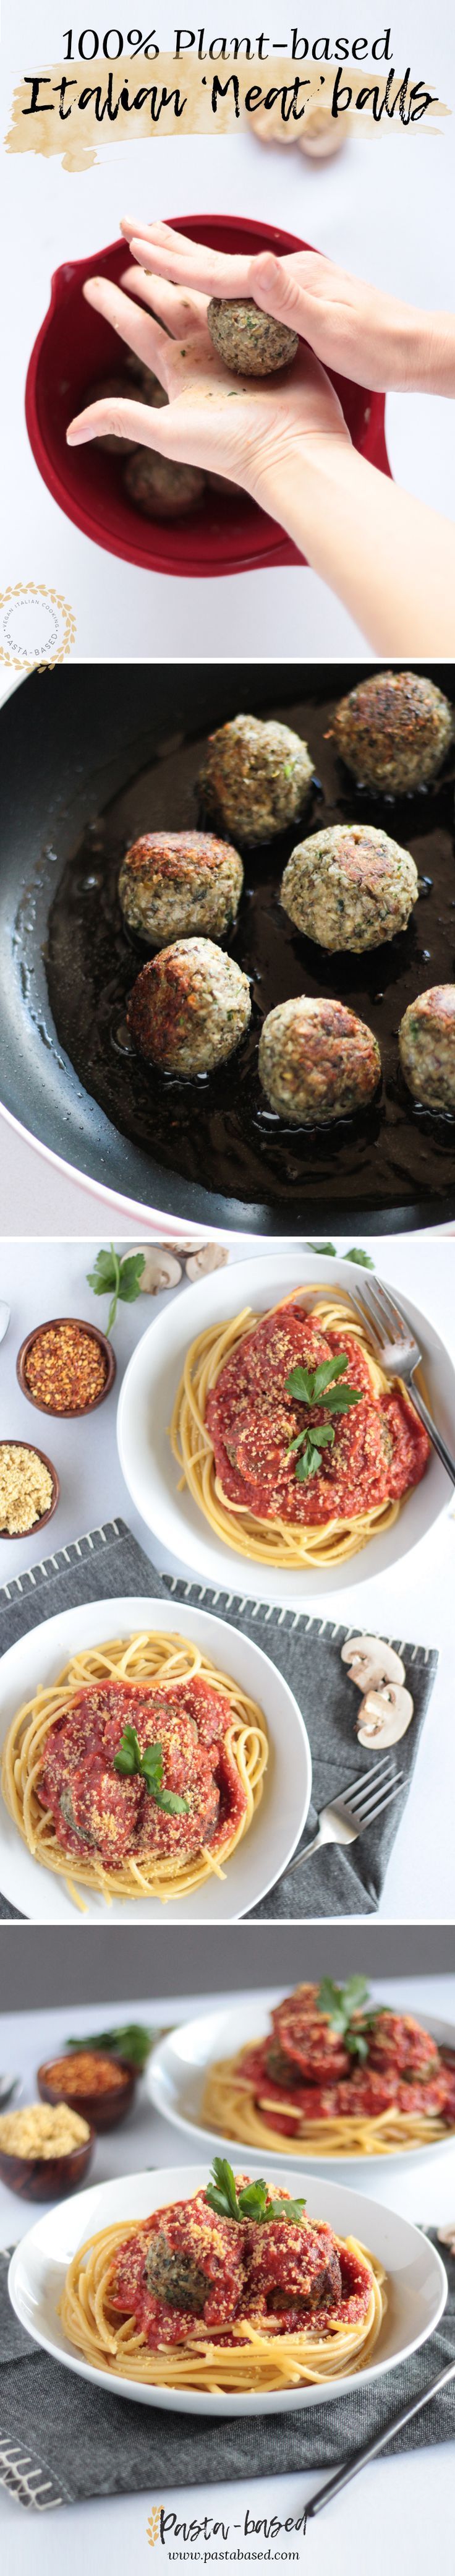 Spaghetti and vegan meatballs • A traditional Italian dish made from plant-based ingredients